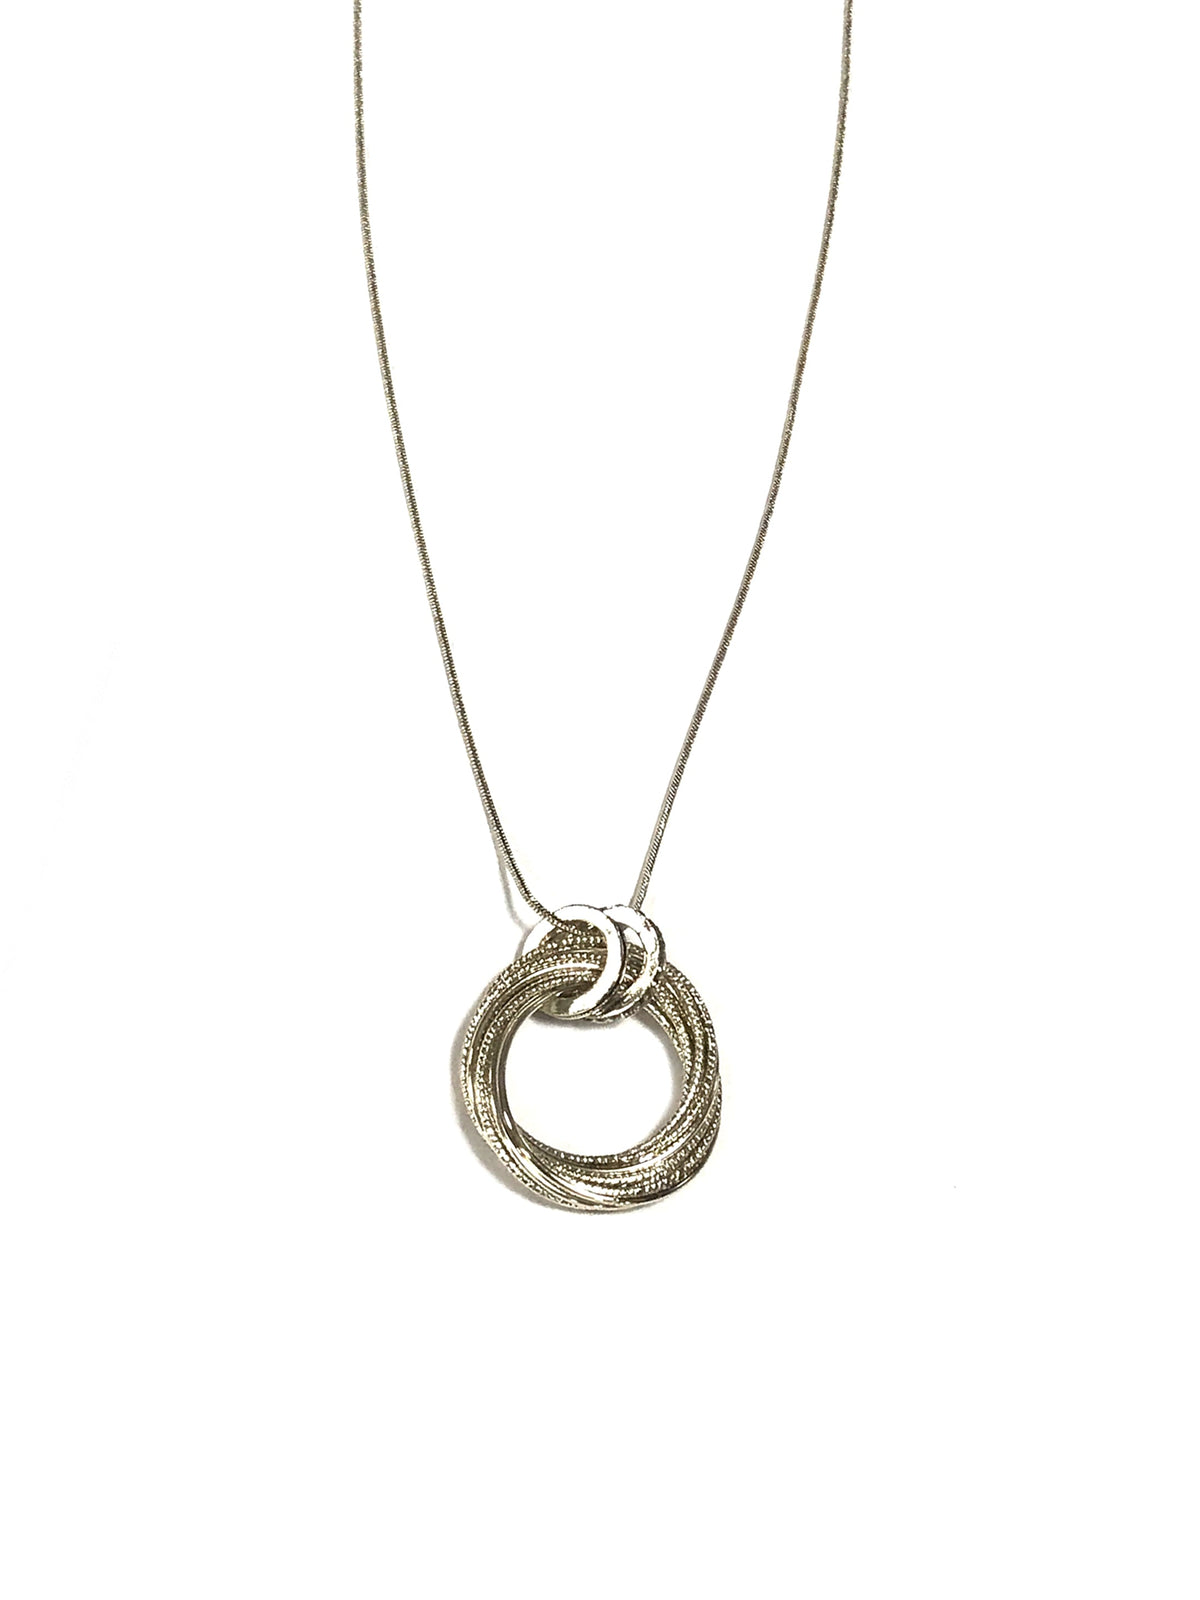 Entwined Medallion Necklace